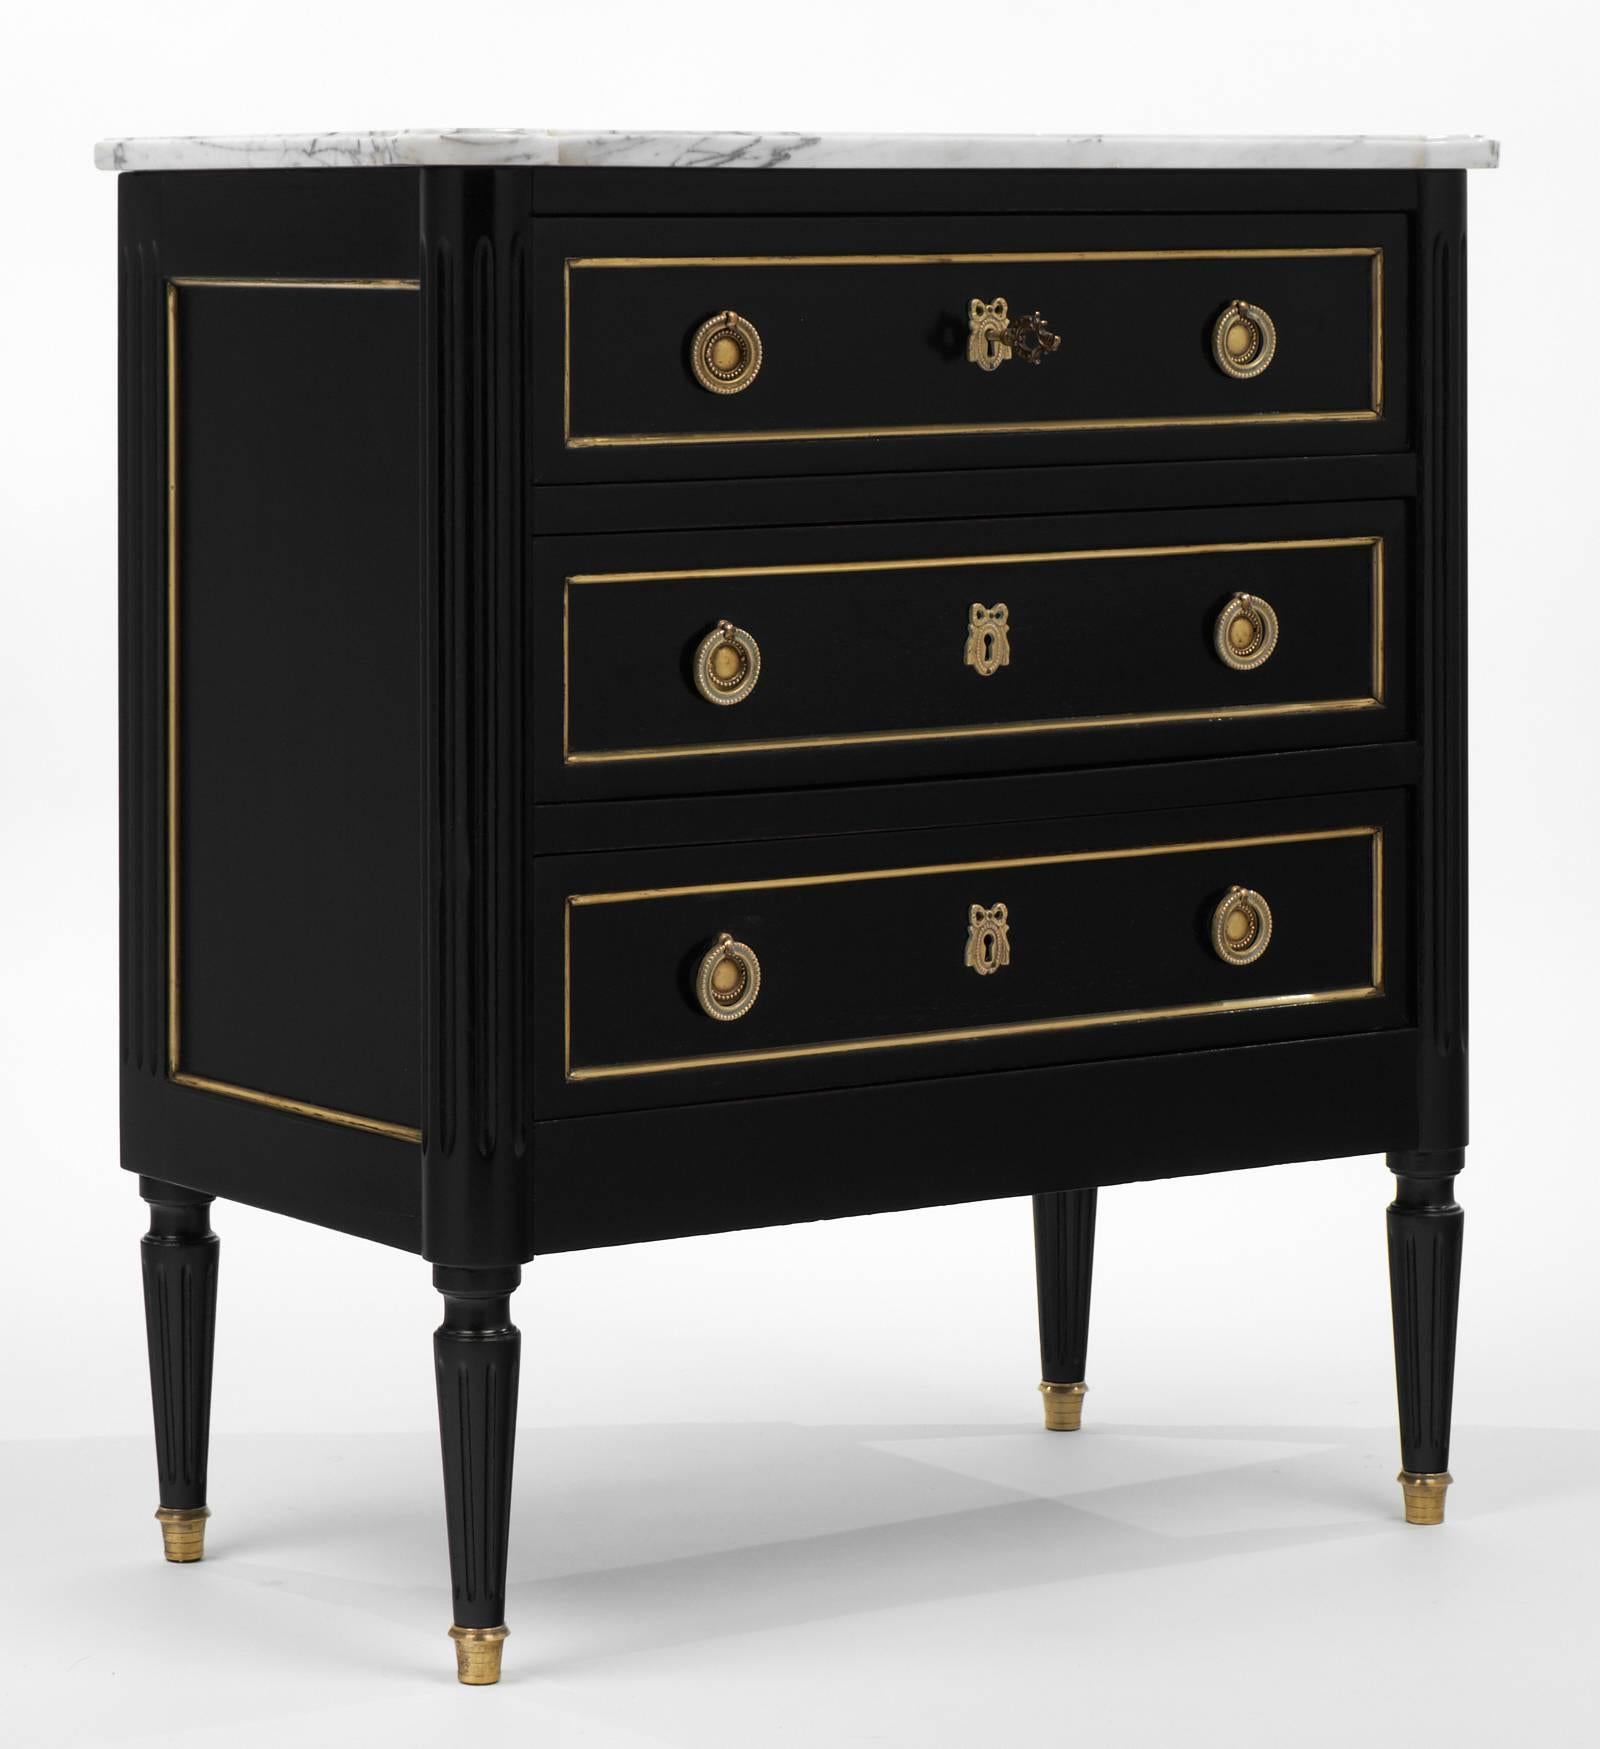 Cast Carrara Marble Topped Louis XVI Style Chest of Drawers